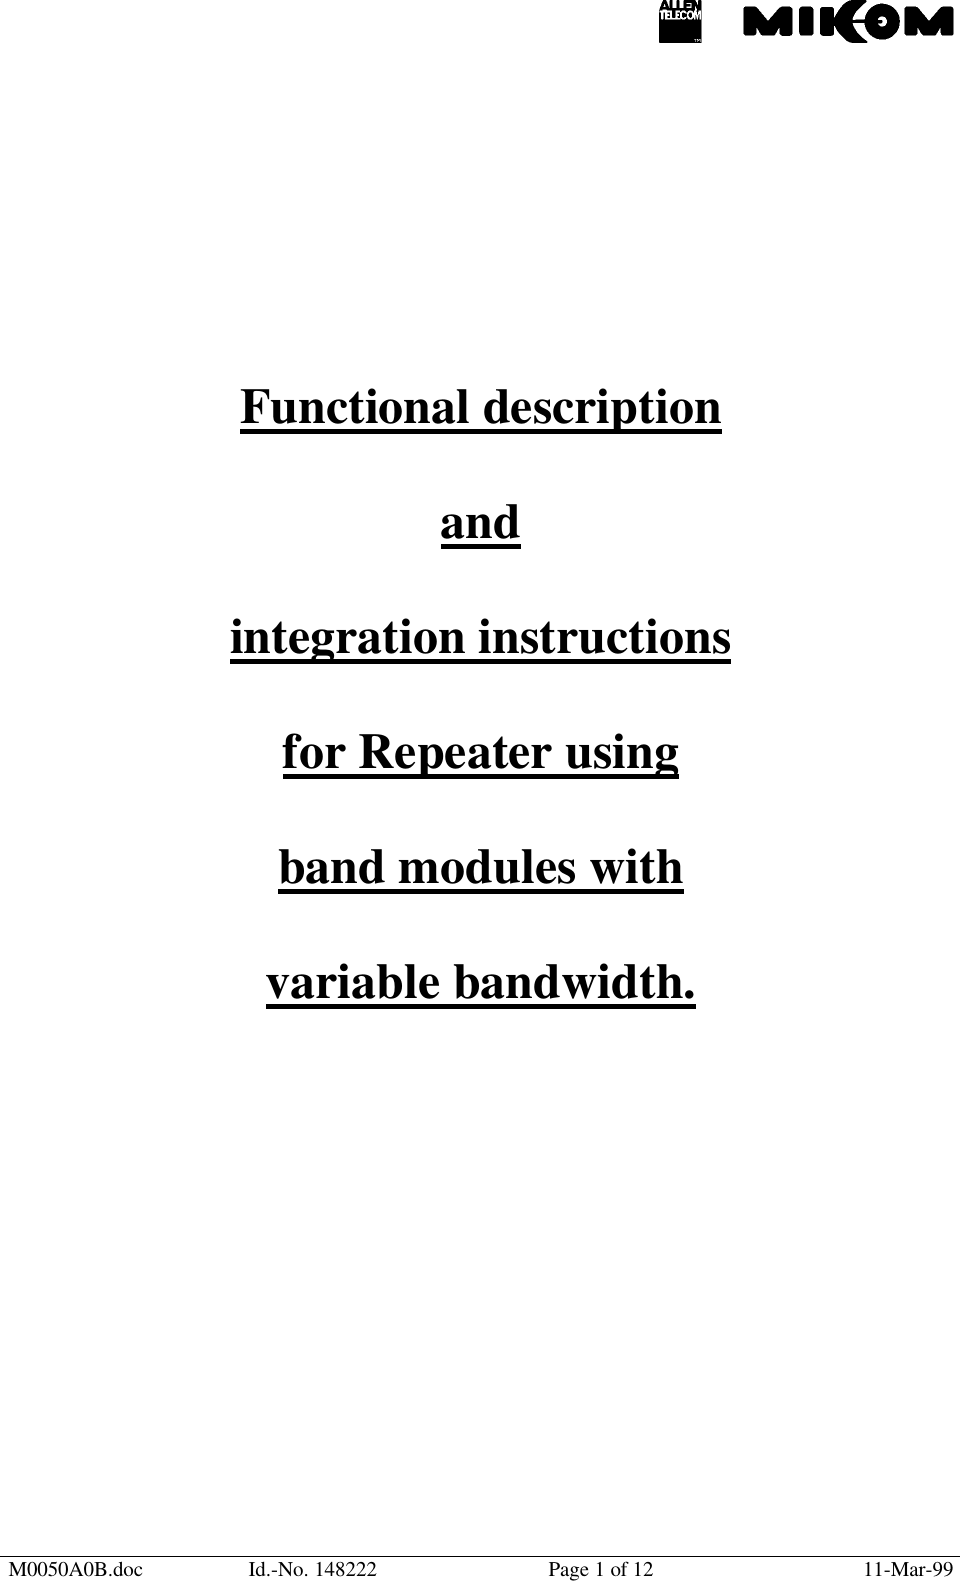 M0050A0B.doc Id.-No. 148222 Page 1 of 12 11-Mar-99Functional descriptionandintegration instructionsfor Repeater usingband modules withvariable bandwidth.